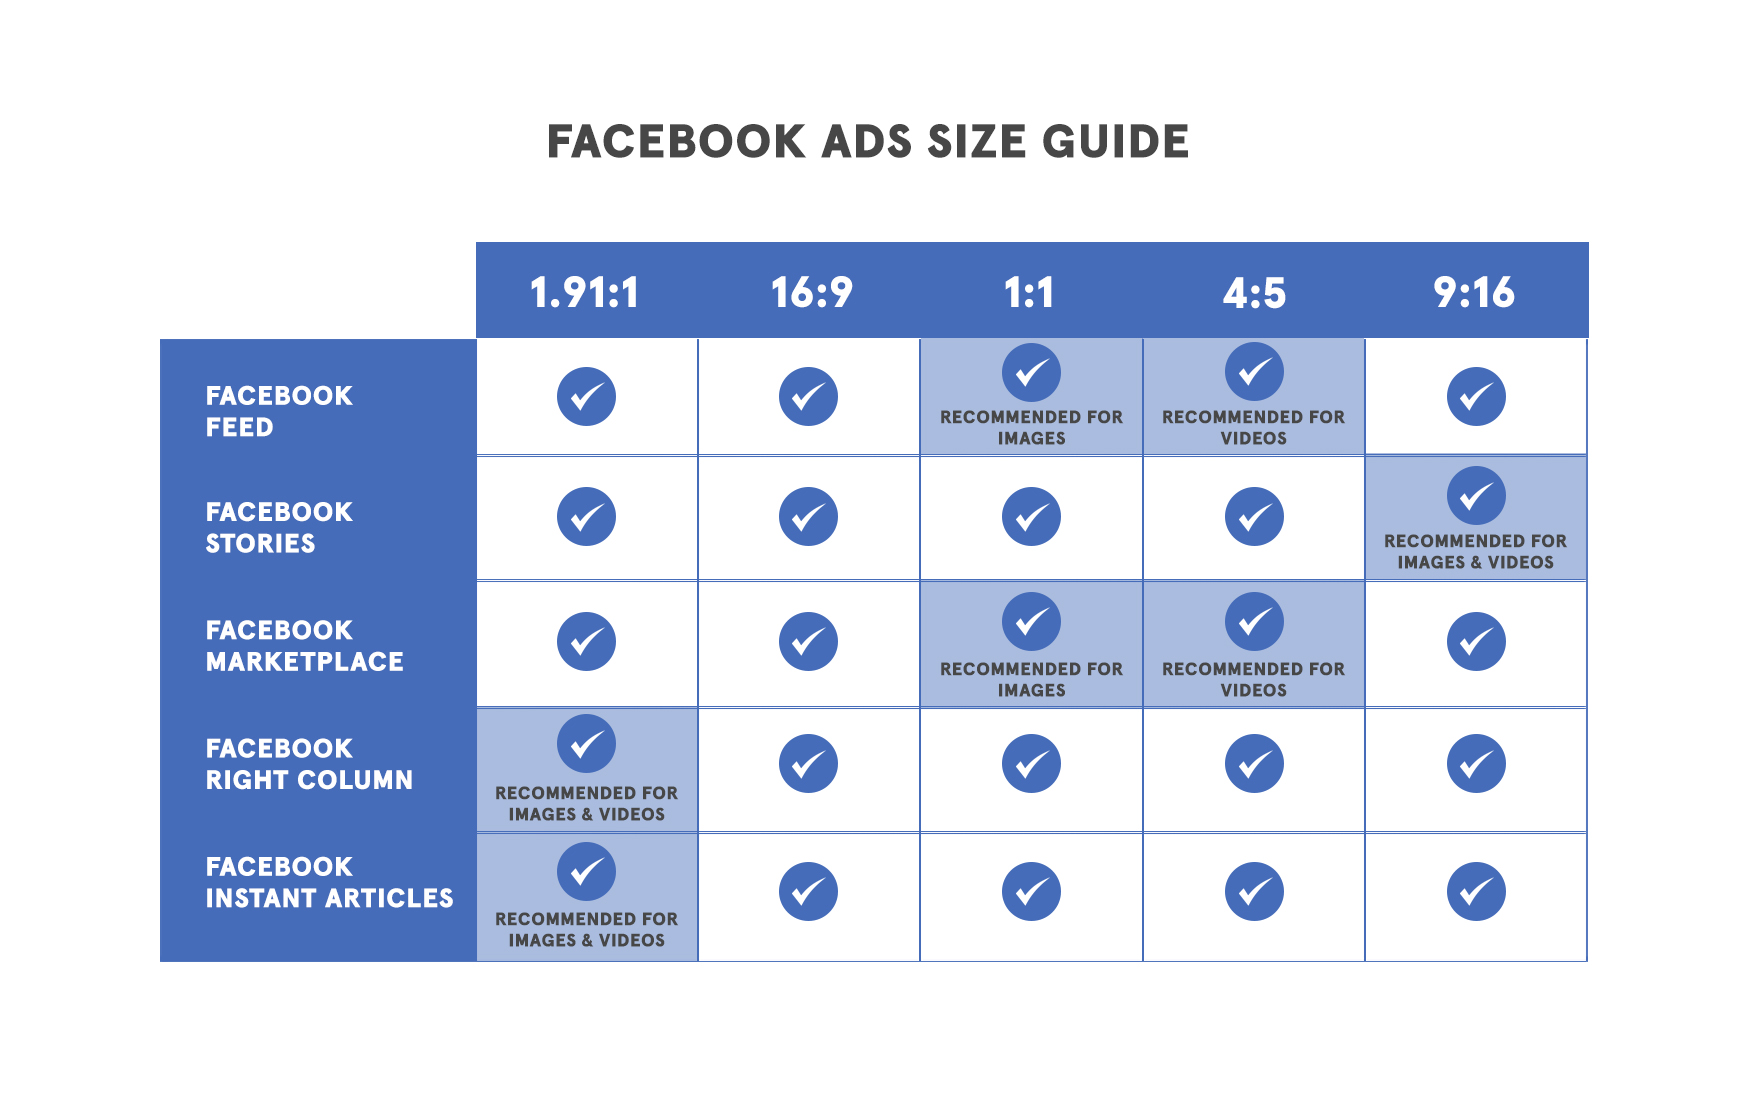 Facebook ads size guide